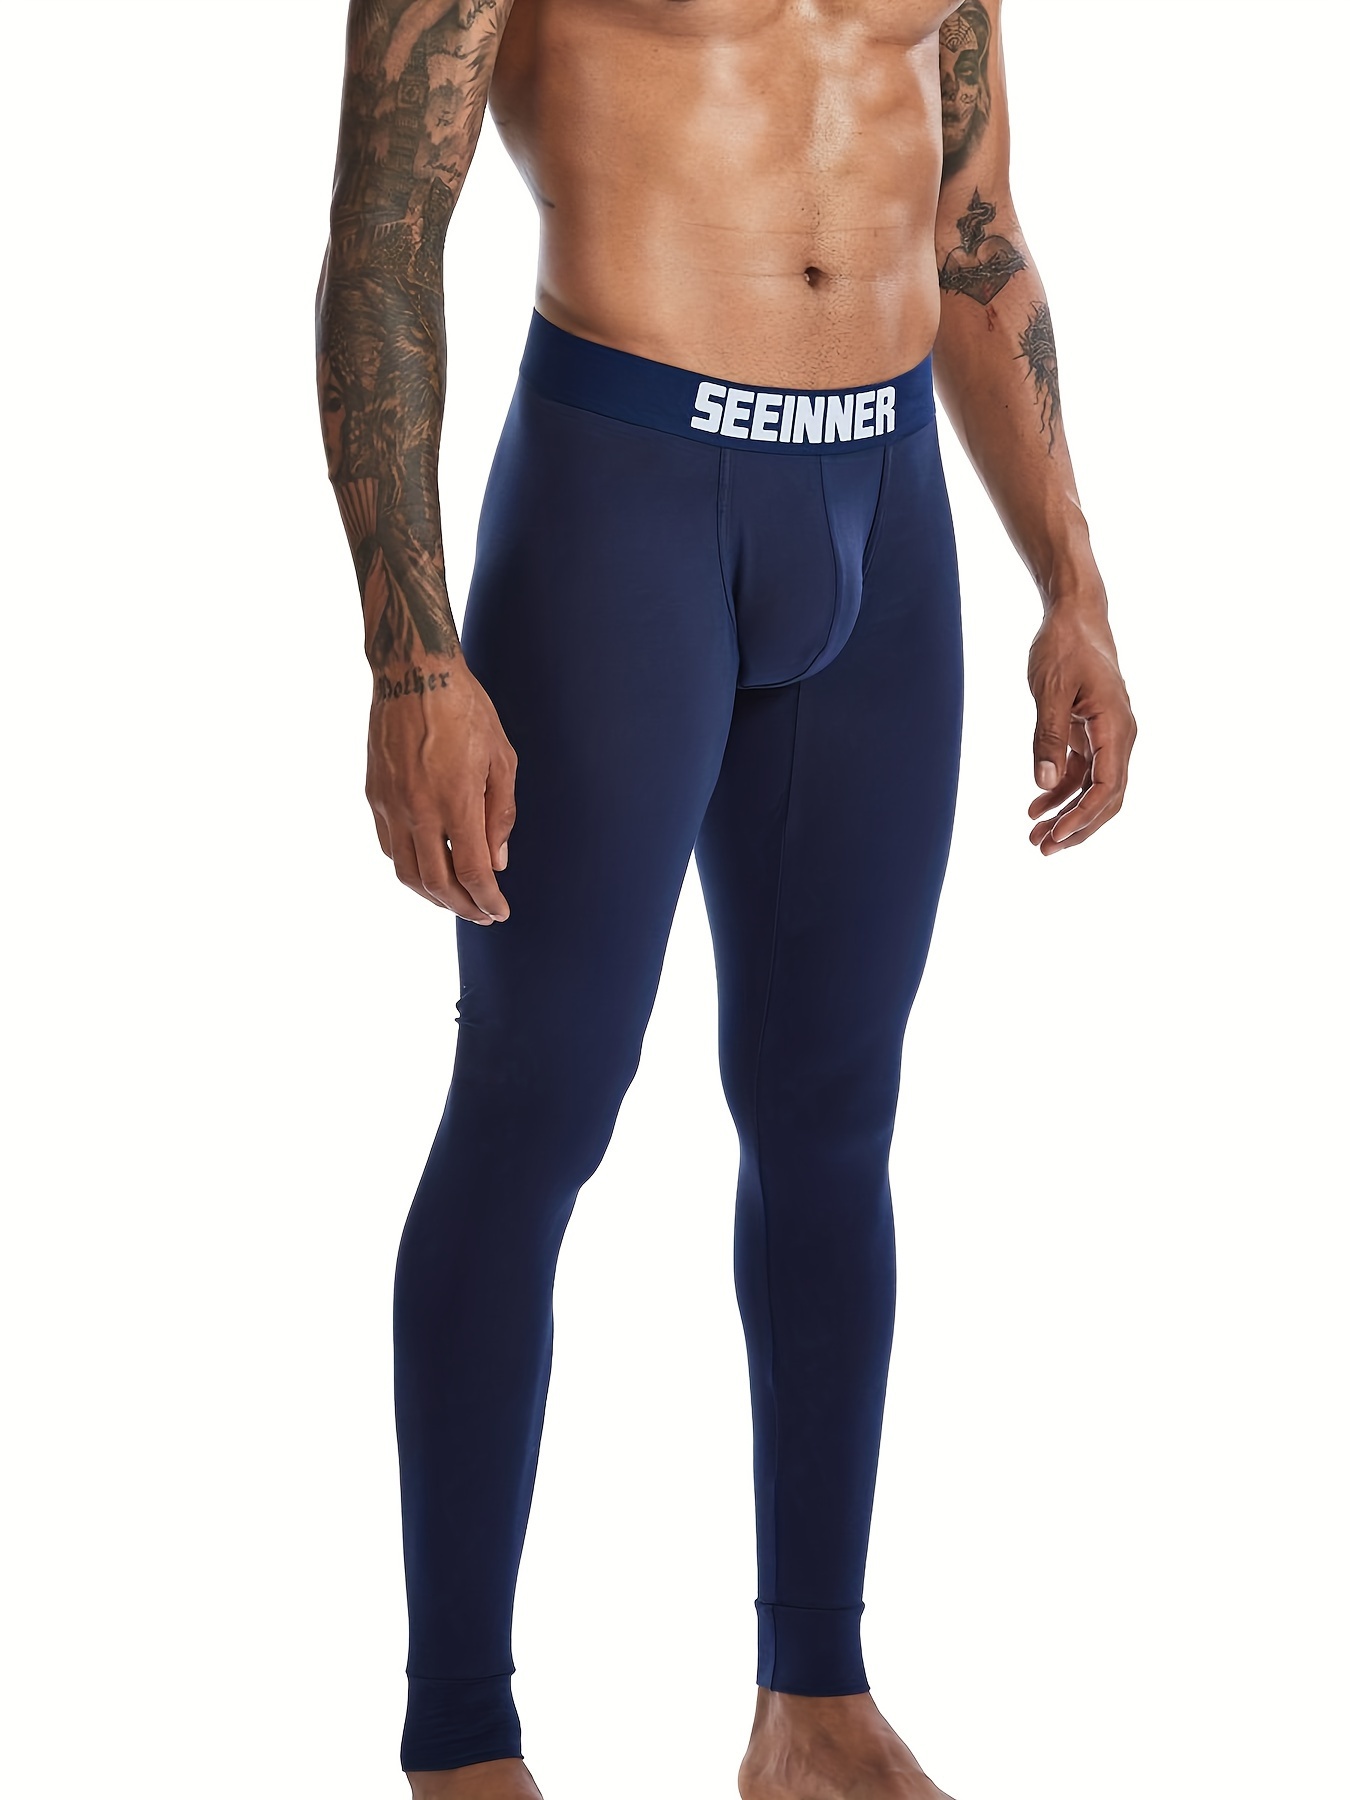 Men's Compression Pants Long Johns Base Layer Leggings Tights Athletic  Autumn Winter Warm Sport Fitness Underwear Baselayer Running Tights 